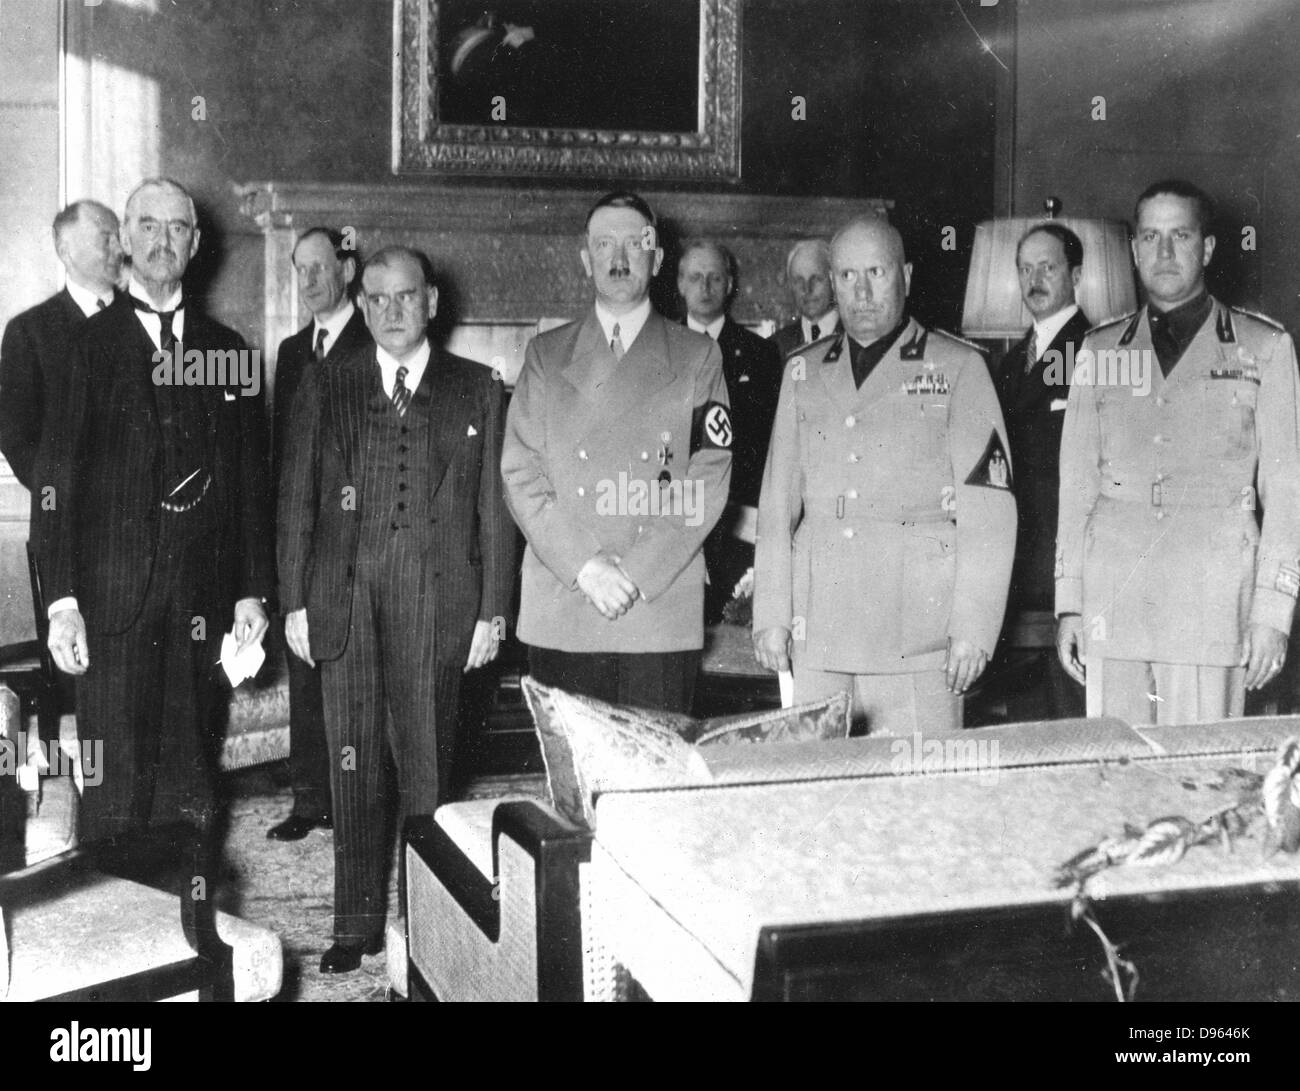 Peace Conference, Munich, Septemebr 1838: Left to right: Neville Chamberlain (Britain) Edouard Daladier (France) Adolph Hitler (Germany) Benito Mussolini (Italy) and Count Ciano (Italy) Stock Photo